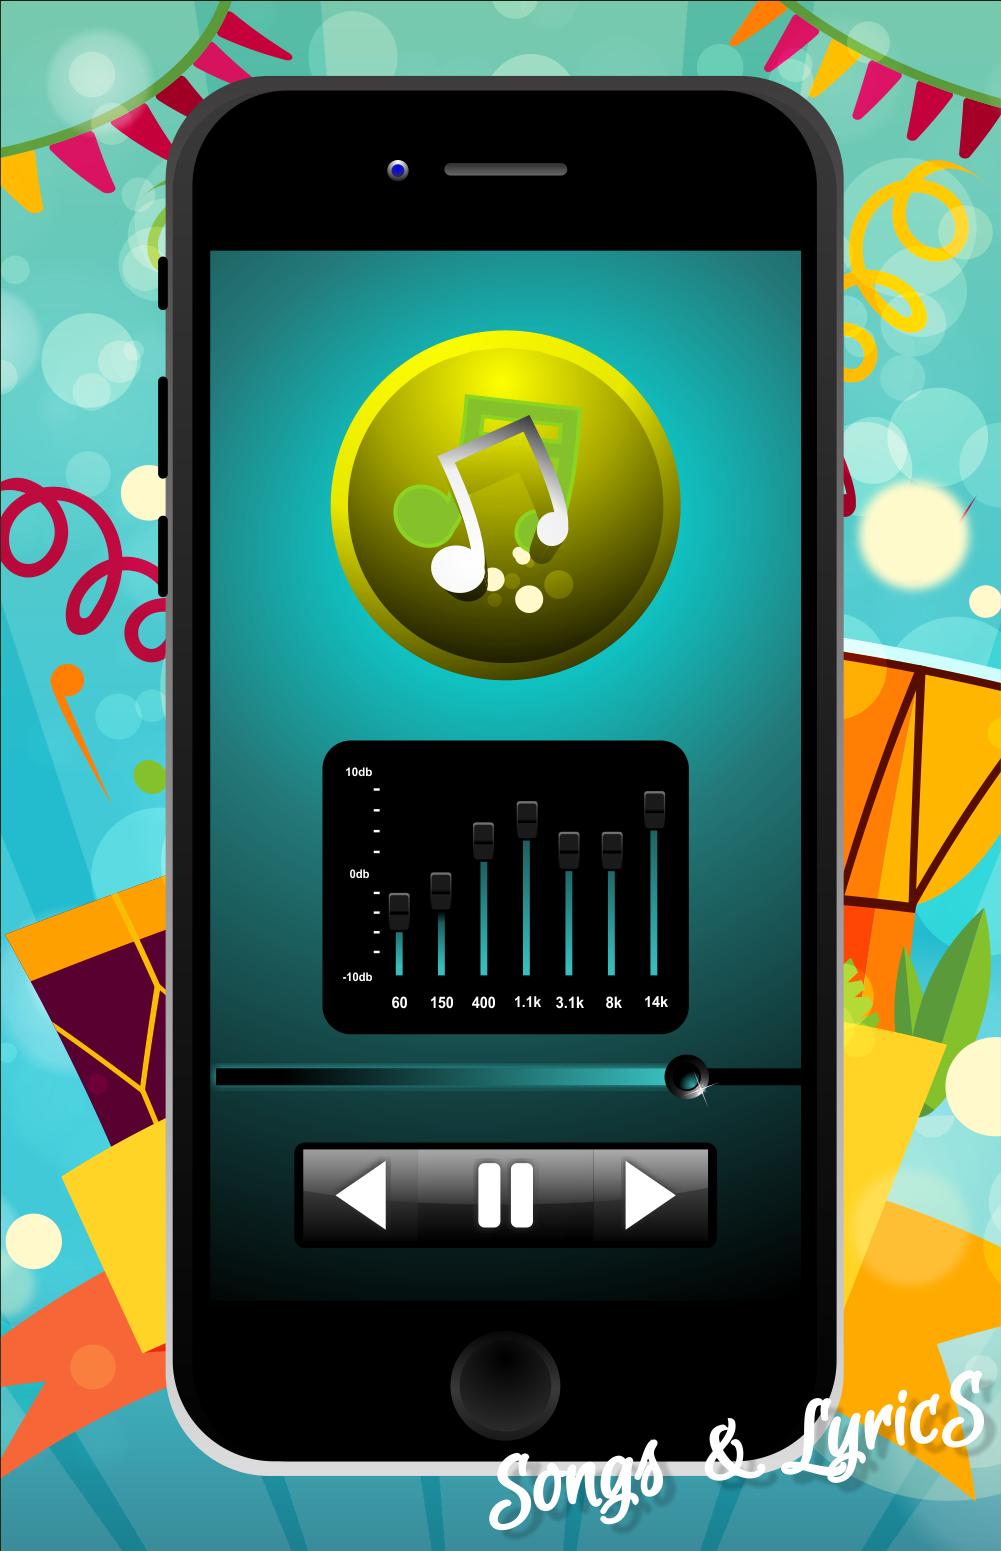 Helene Fischer All Songs for Android - APK Download